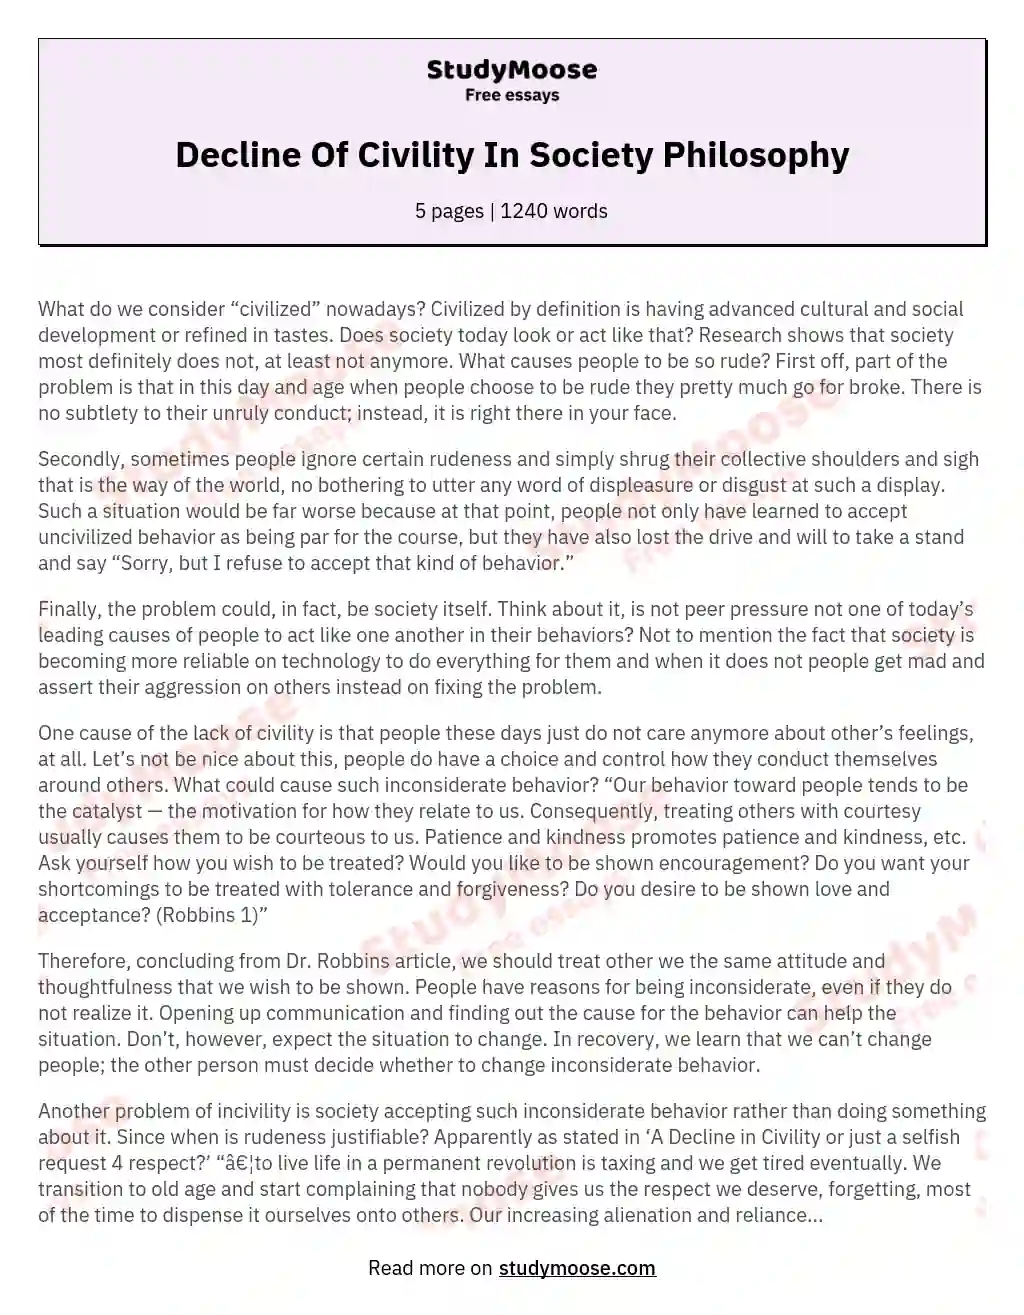 Decline Of Civility In Society Philosophy essay